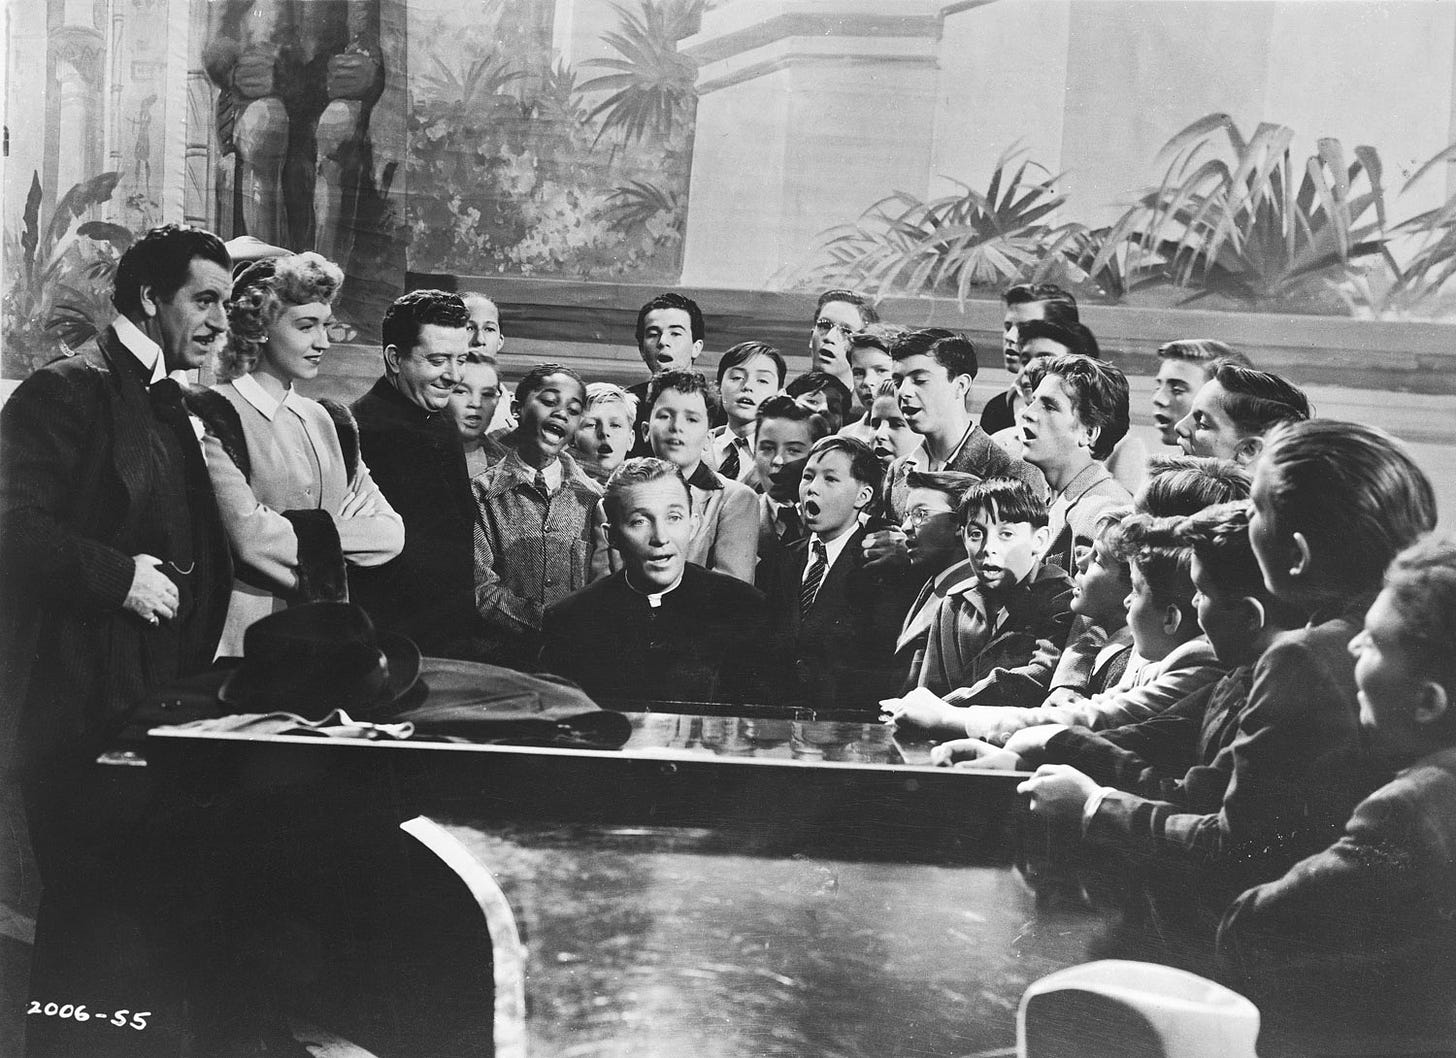 Bing Crosby, Fortunio Bonanova, Stanley Clements, Frank McHugh, Rise Stevens, Carl 'Alfalfa' Switzer, and The Robert Mitchell Boy Choir gathered around the grand piano at the Metropolitan Opera House while Bing plays and everybody sings in 1944 film Going My Way